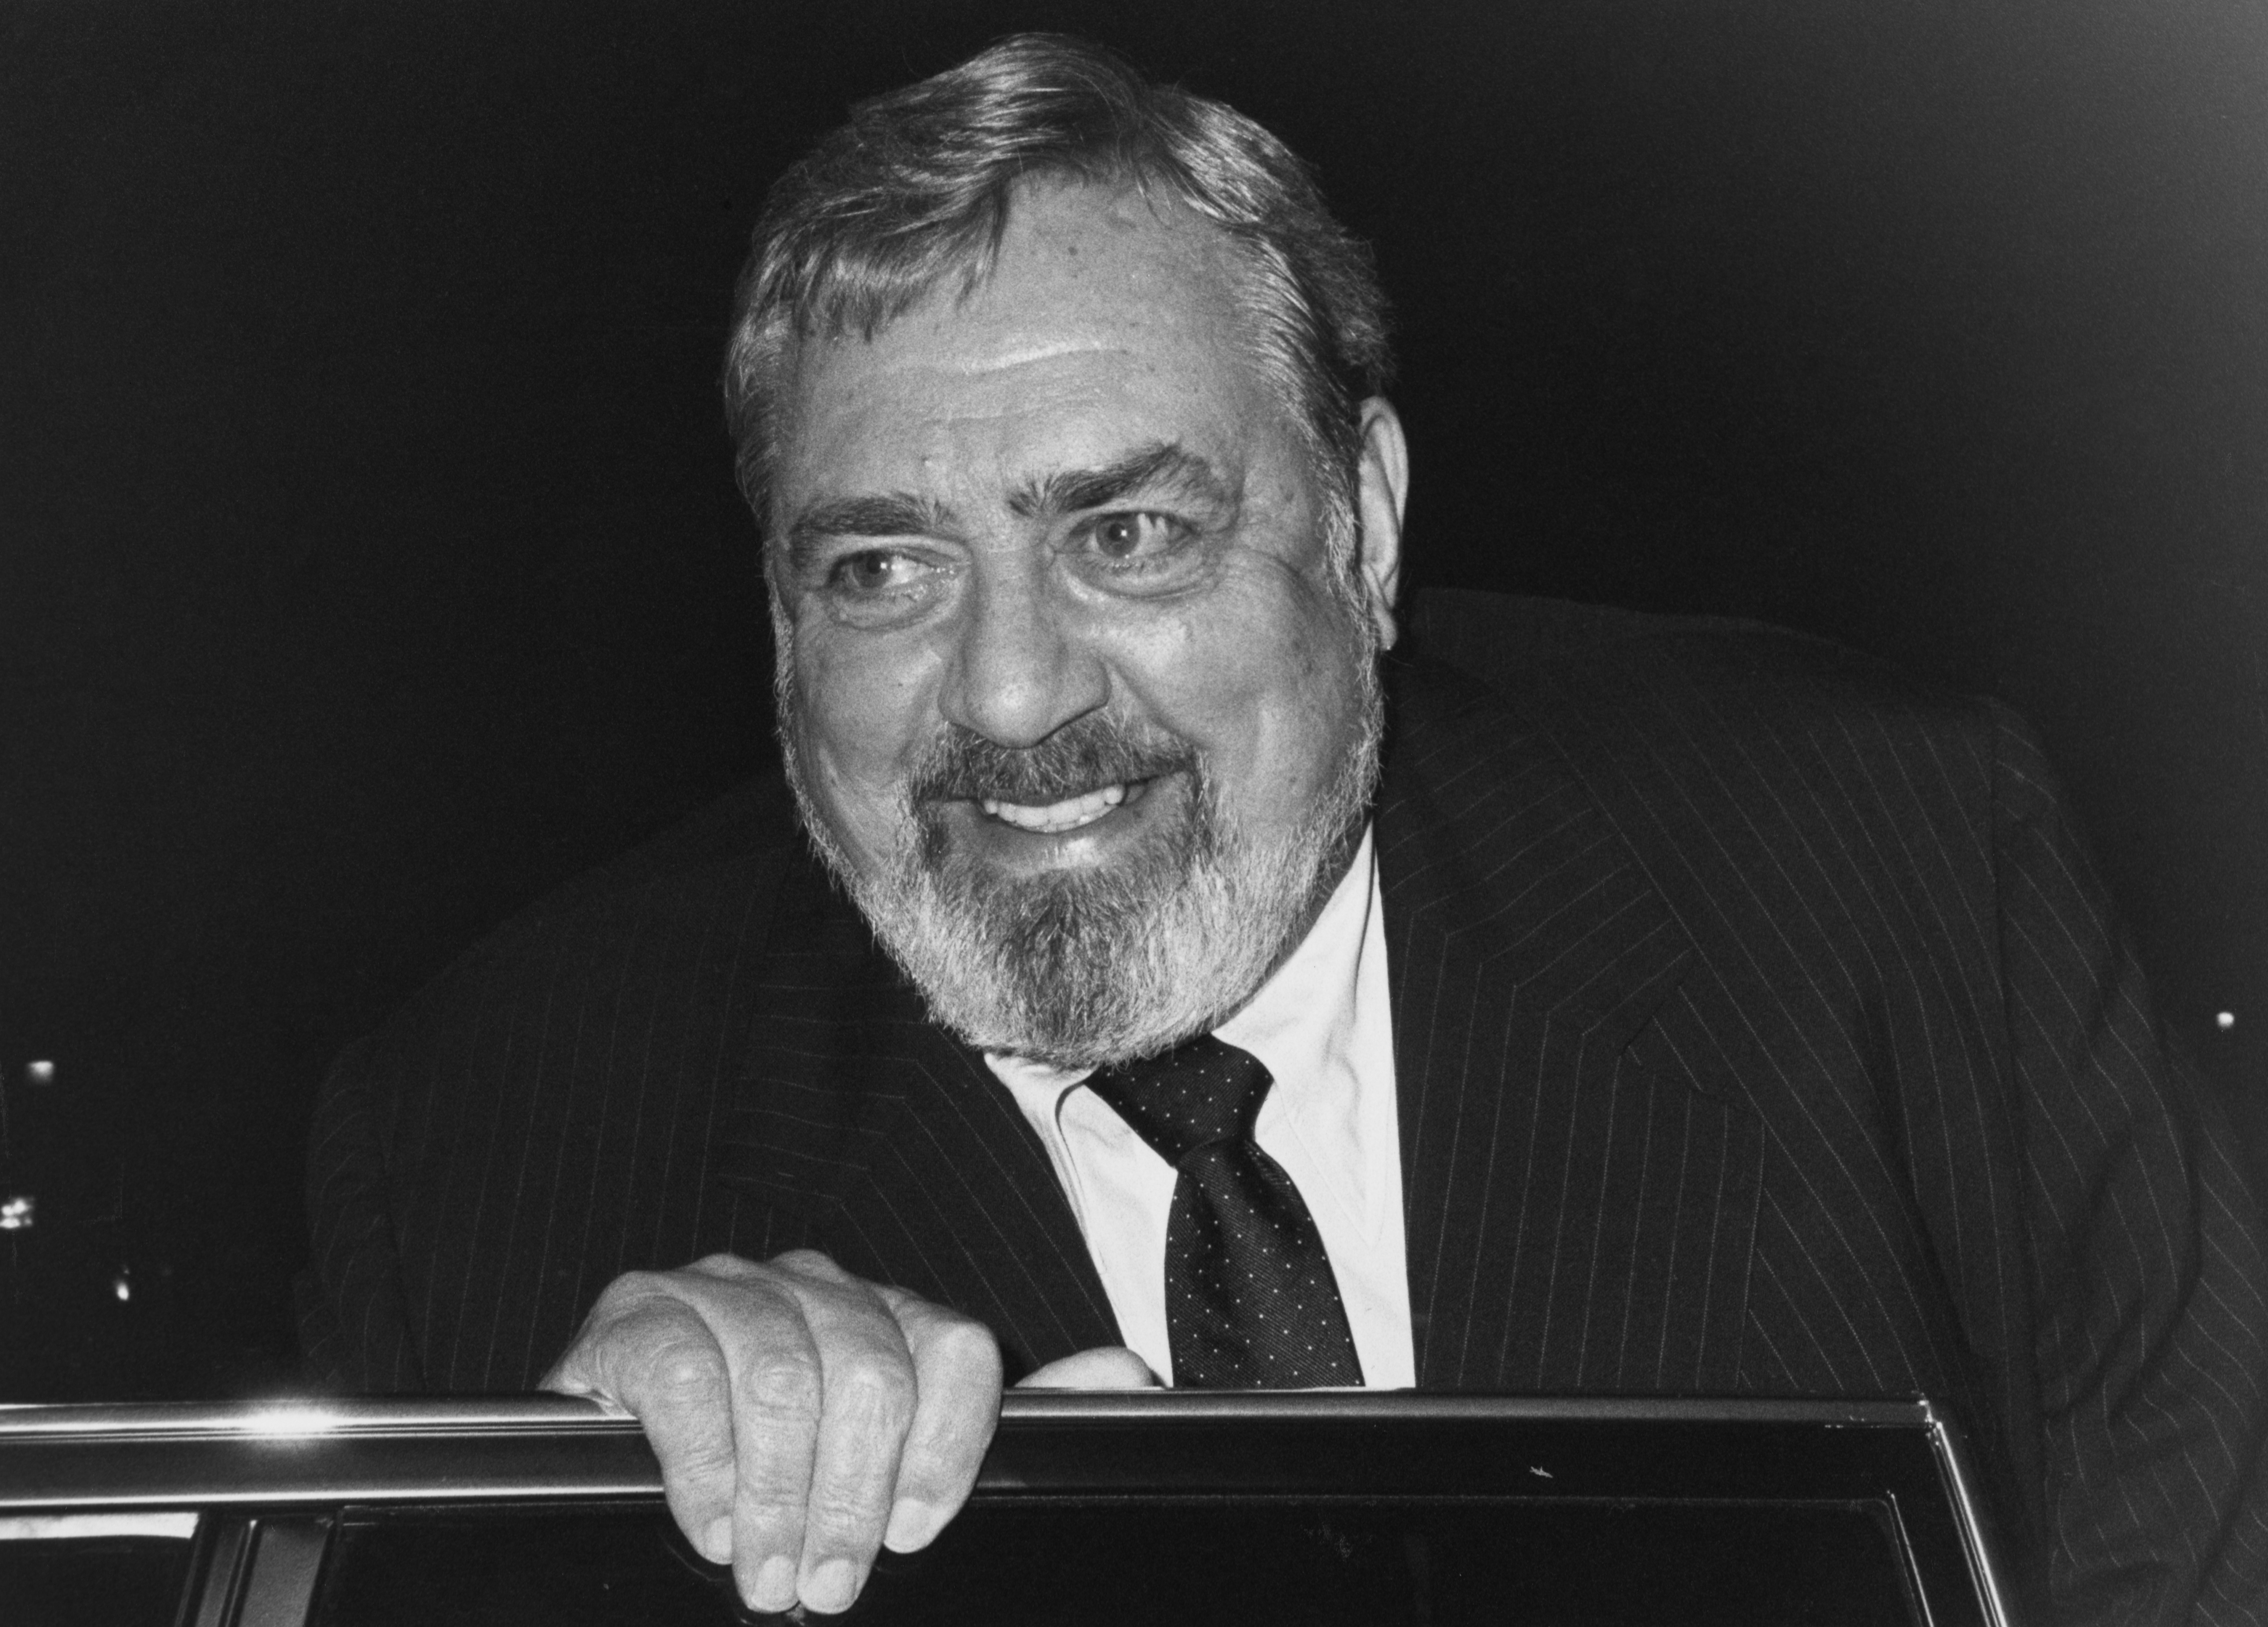 Raymond Burr in Los Angeles, California, circa 1985 | Source: Getty Images